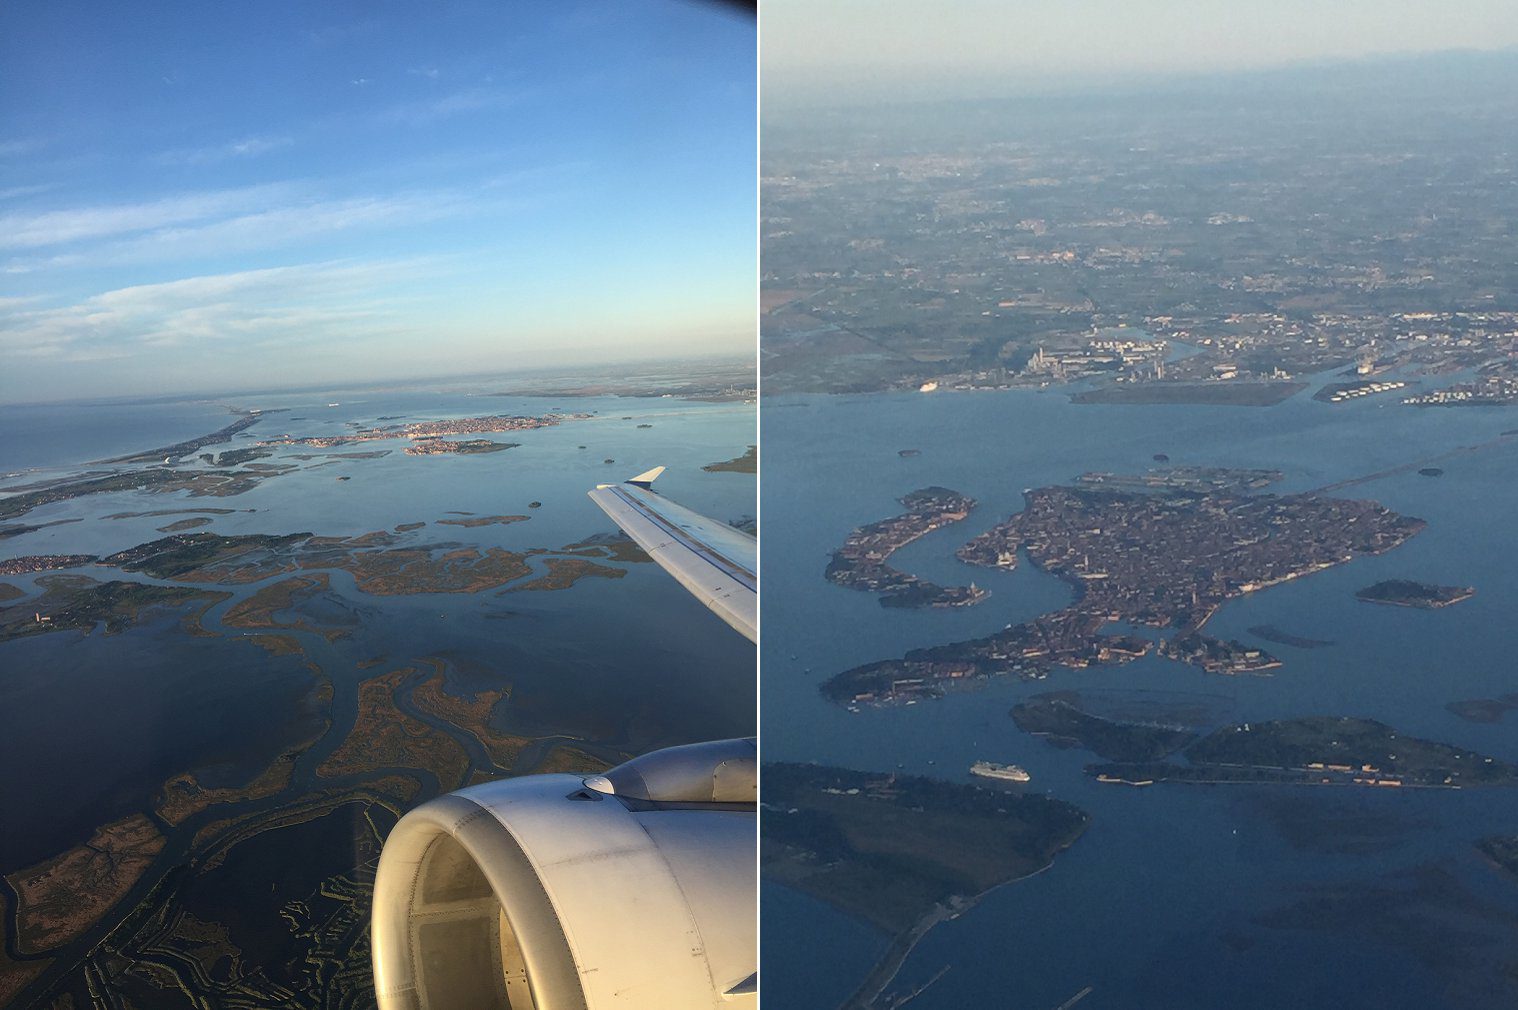 view of Venice from the air